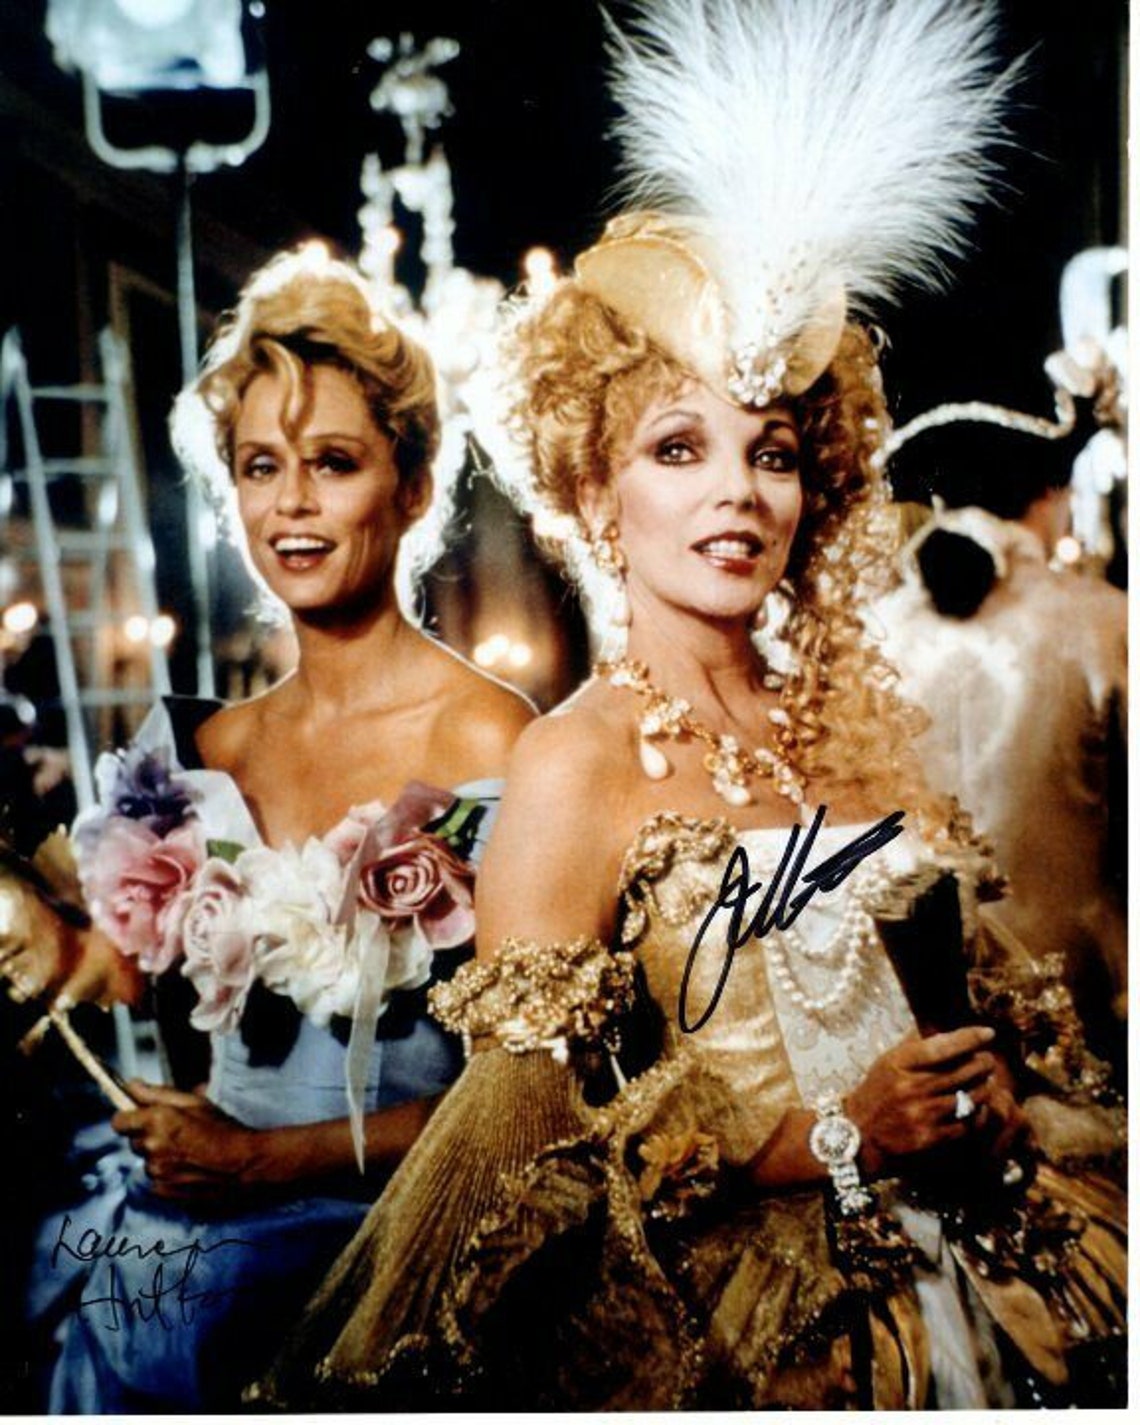 Lauren Hutton and Joan Collins Signed Autographed 8x10 Sins Photo - Etsy